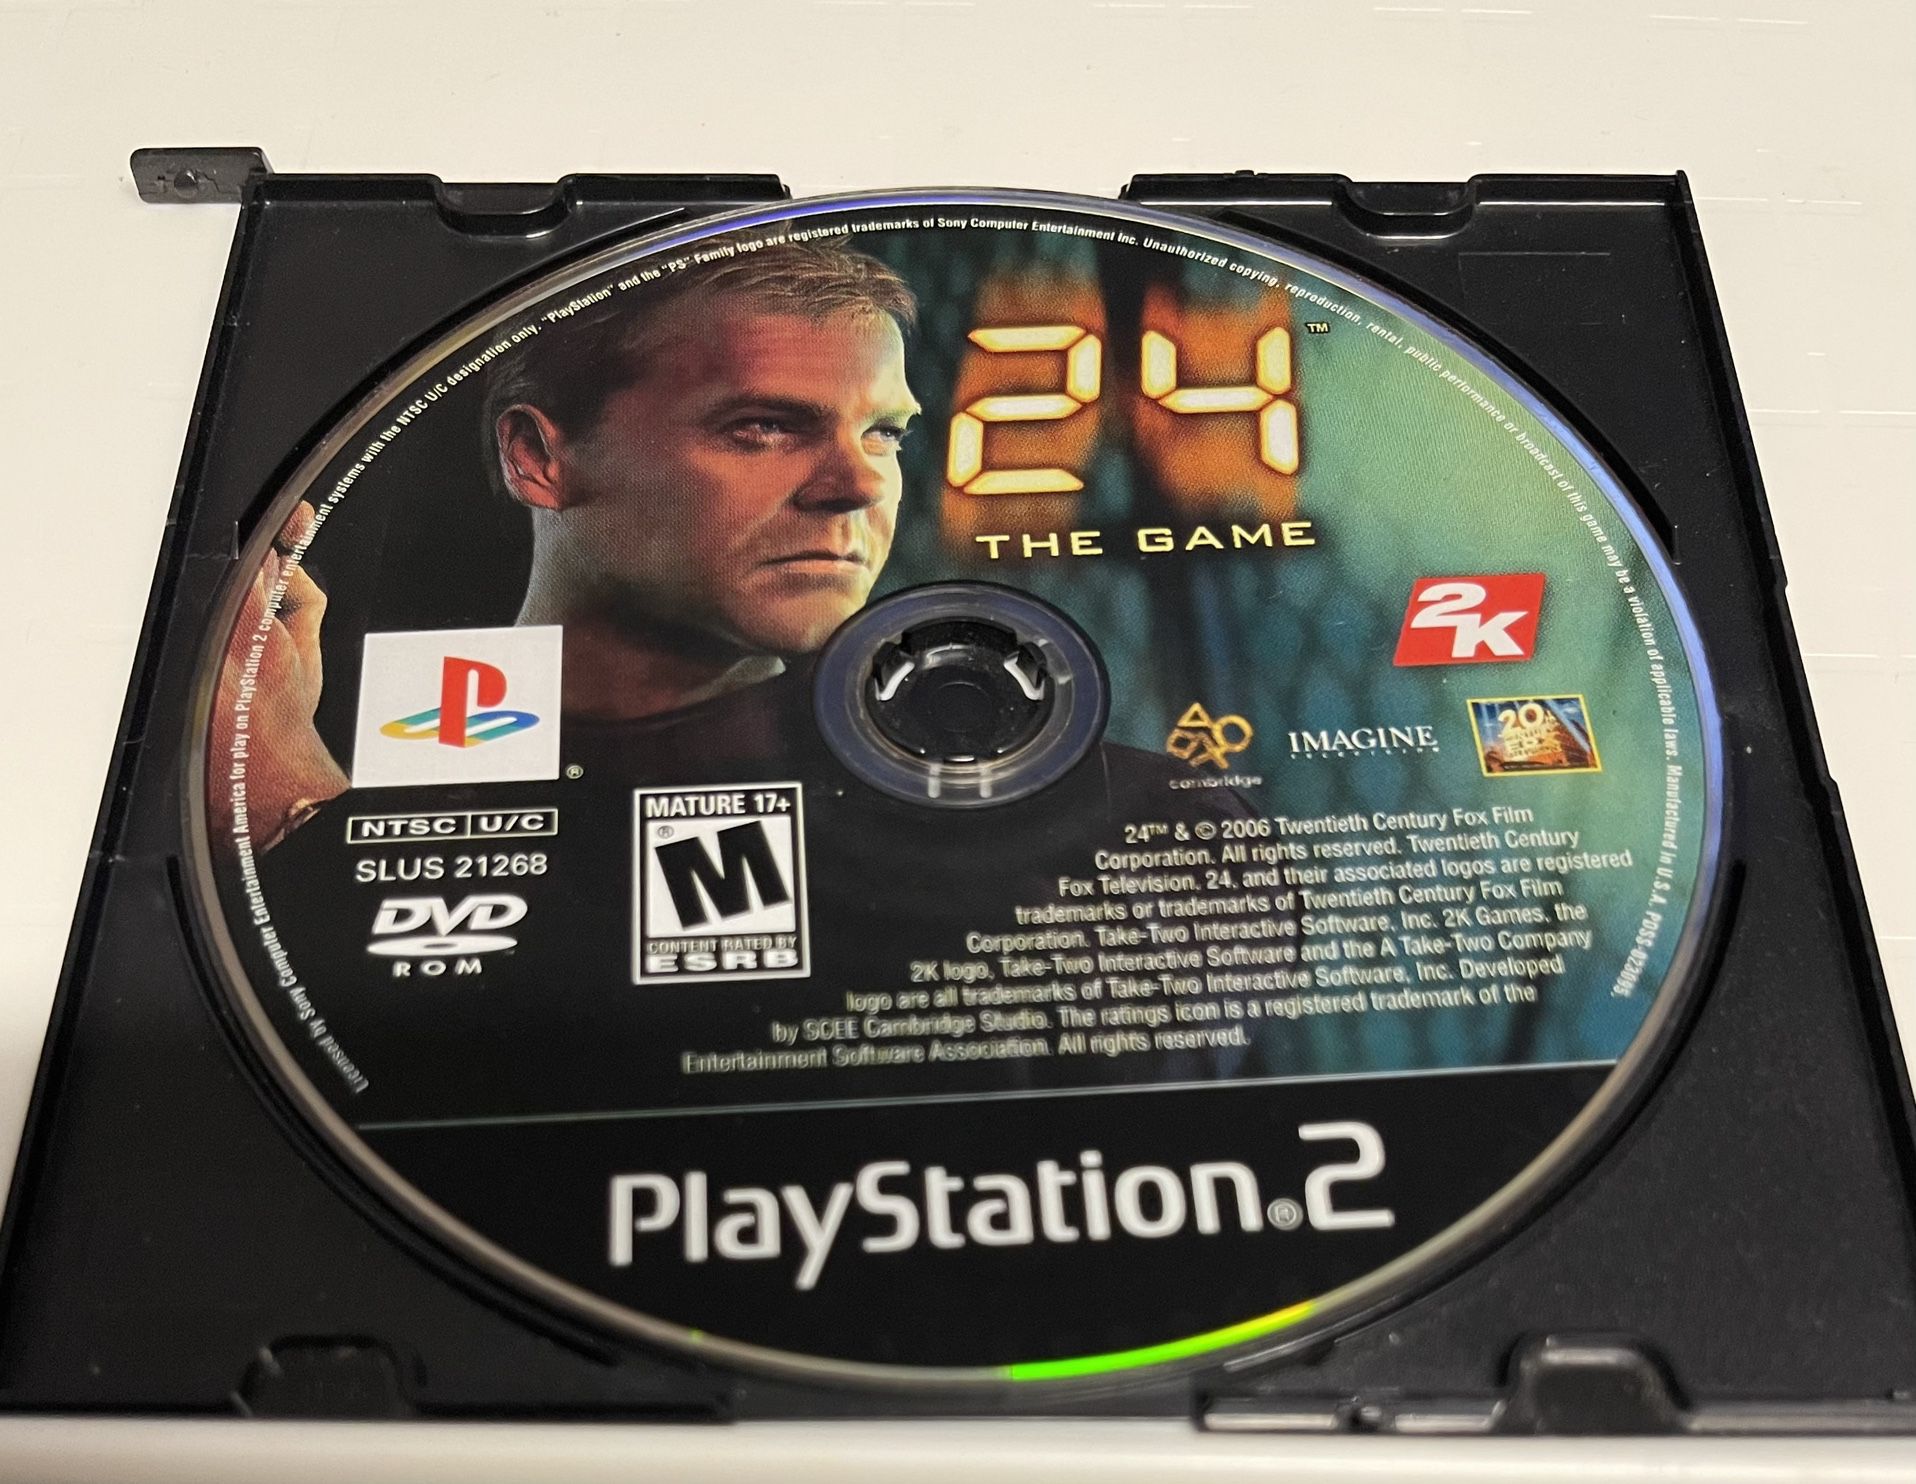 24: The Game - PlayStation 2